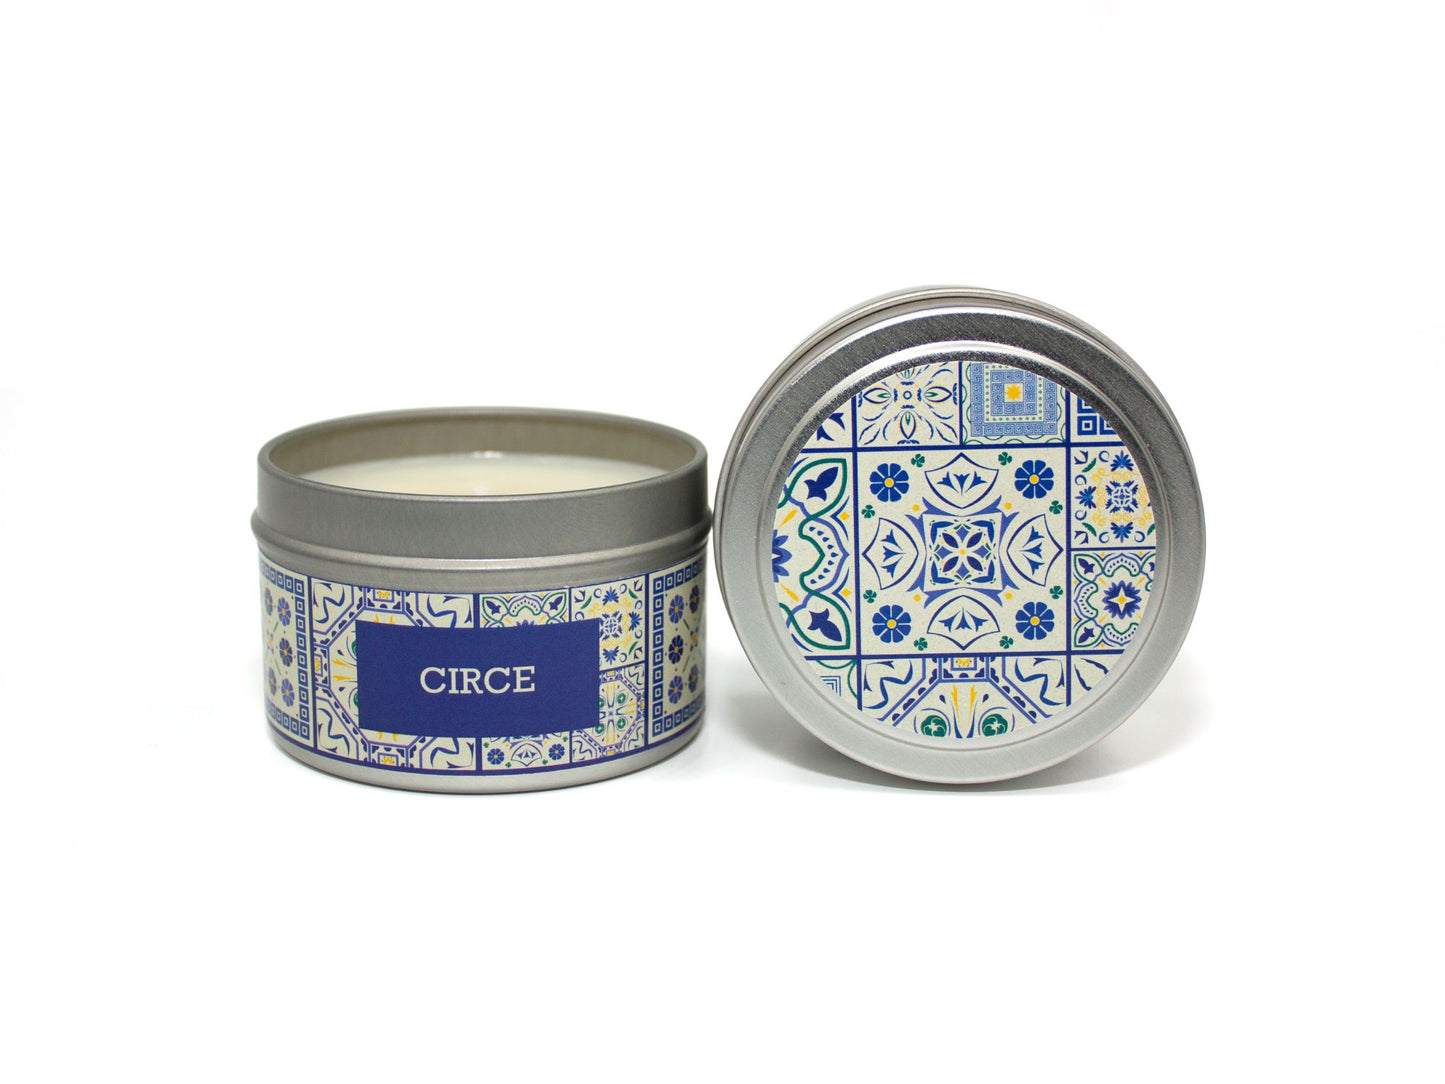 Onset & Rime lemon, cypress scented candle called "Circe" in a 4 oz silver tin. The circular label on top is white with a dark blue Greek tile pattern. The text on the front label is "Circe - Salt Water, Sicilian Lemon, Cypress, Fig".